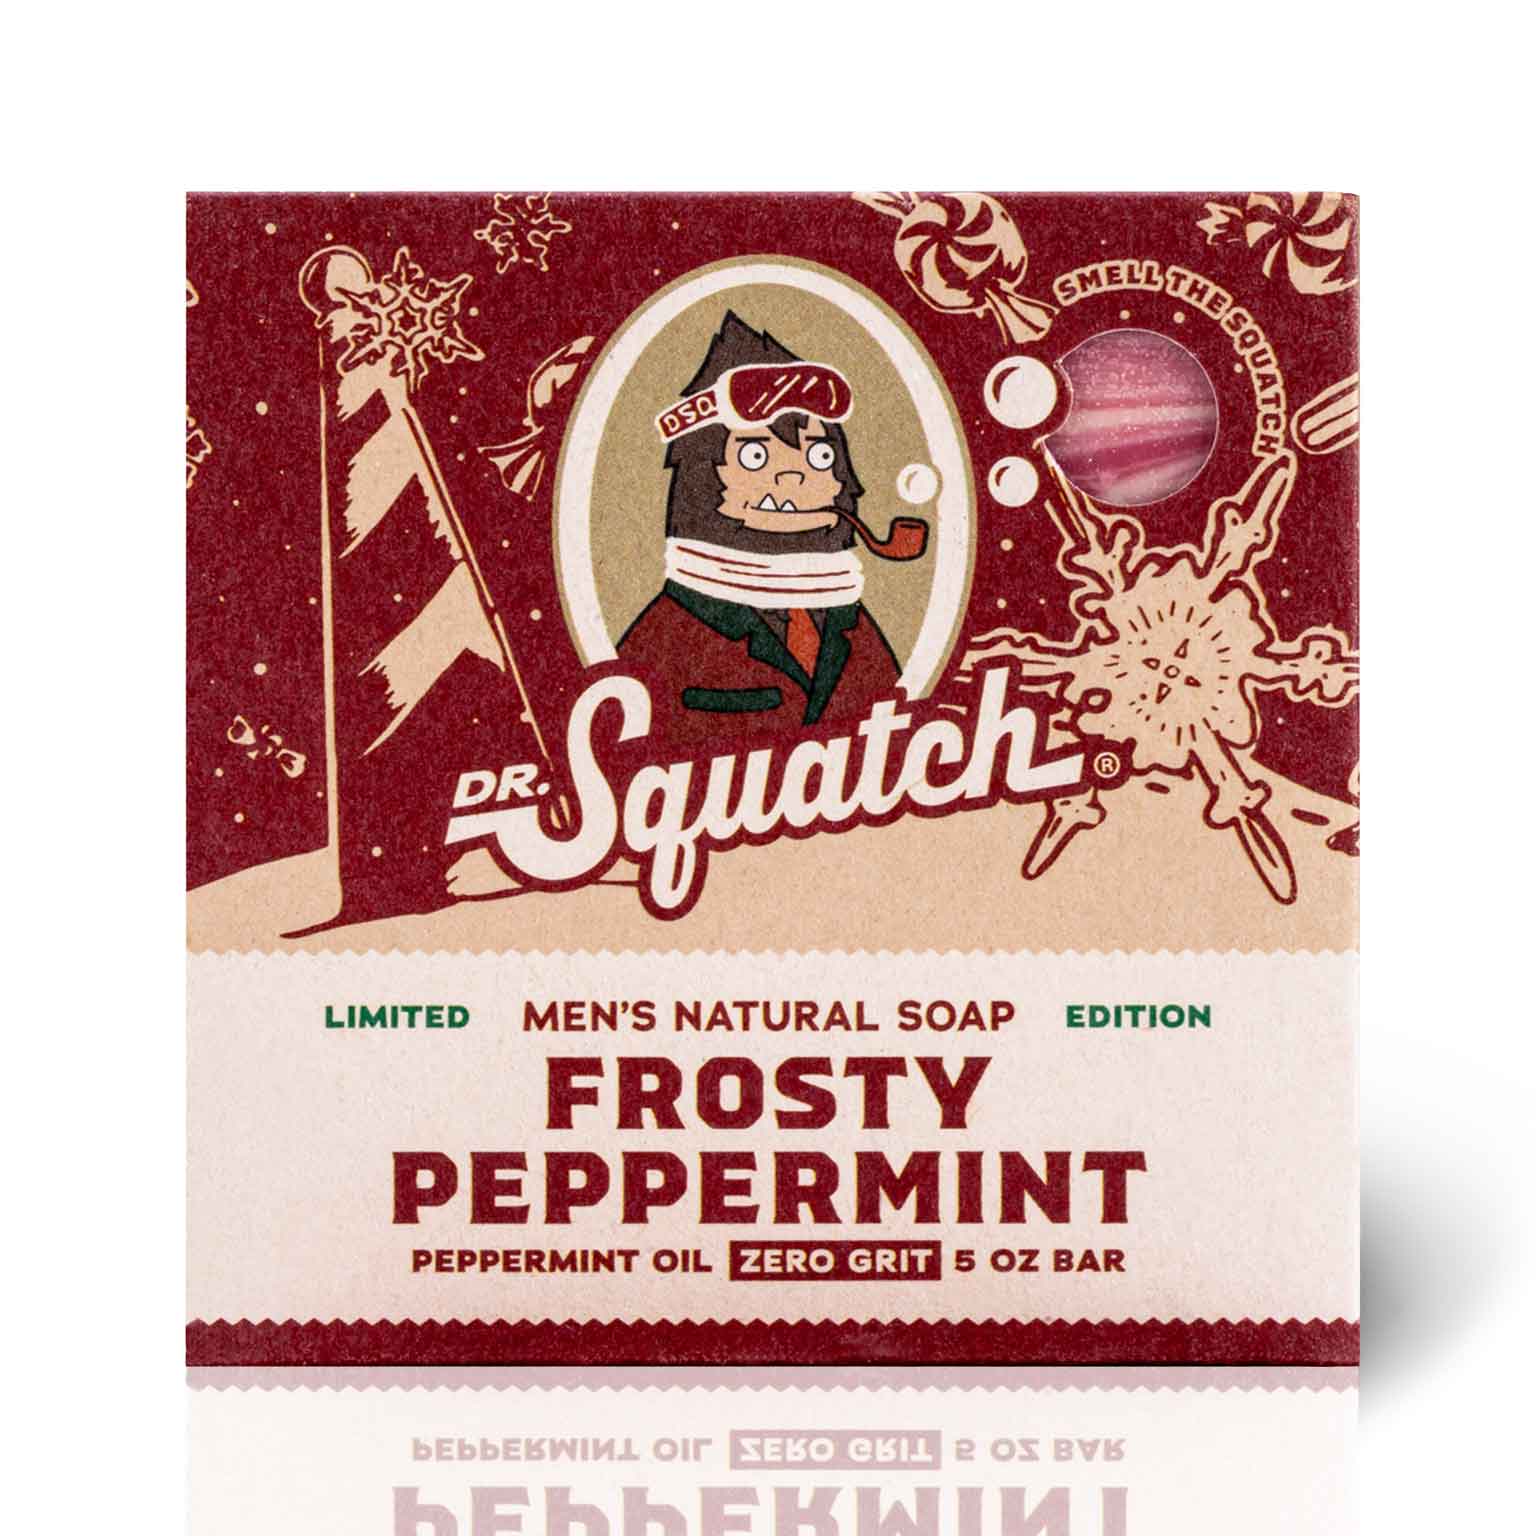 Dr. Squatch - Frosty Peppermint Soap Bar I The Kings of Styling